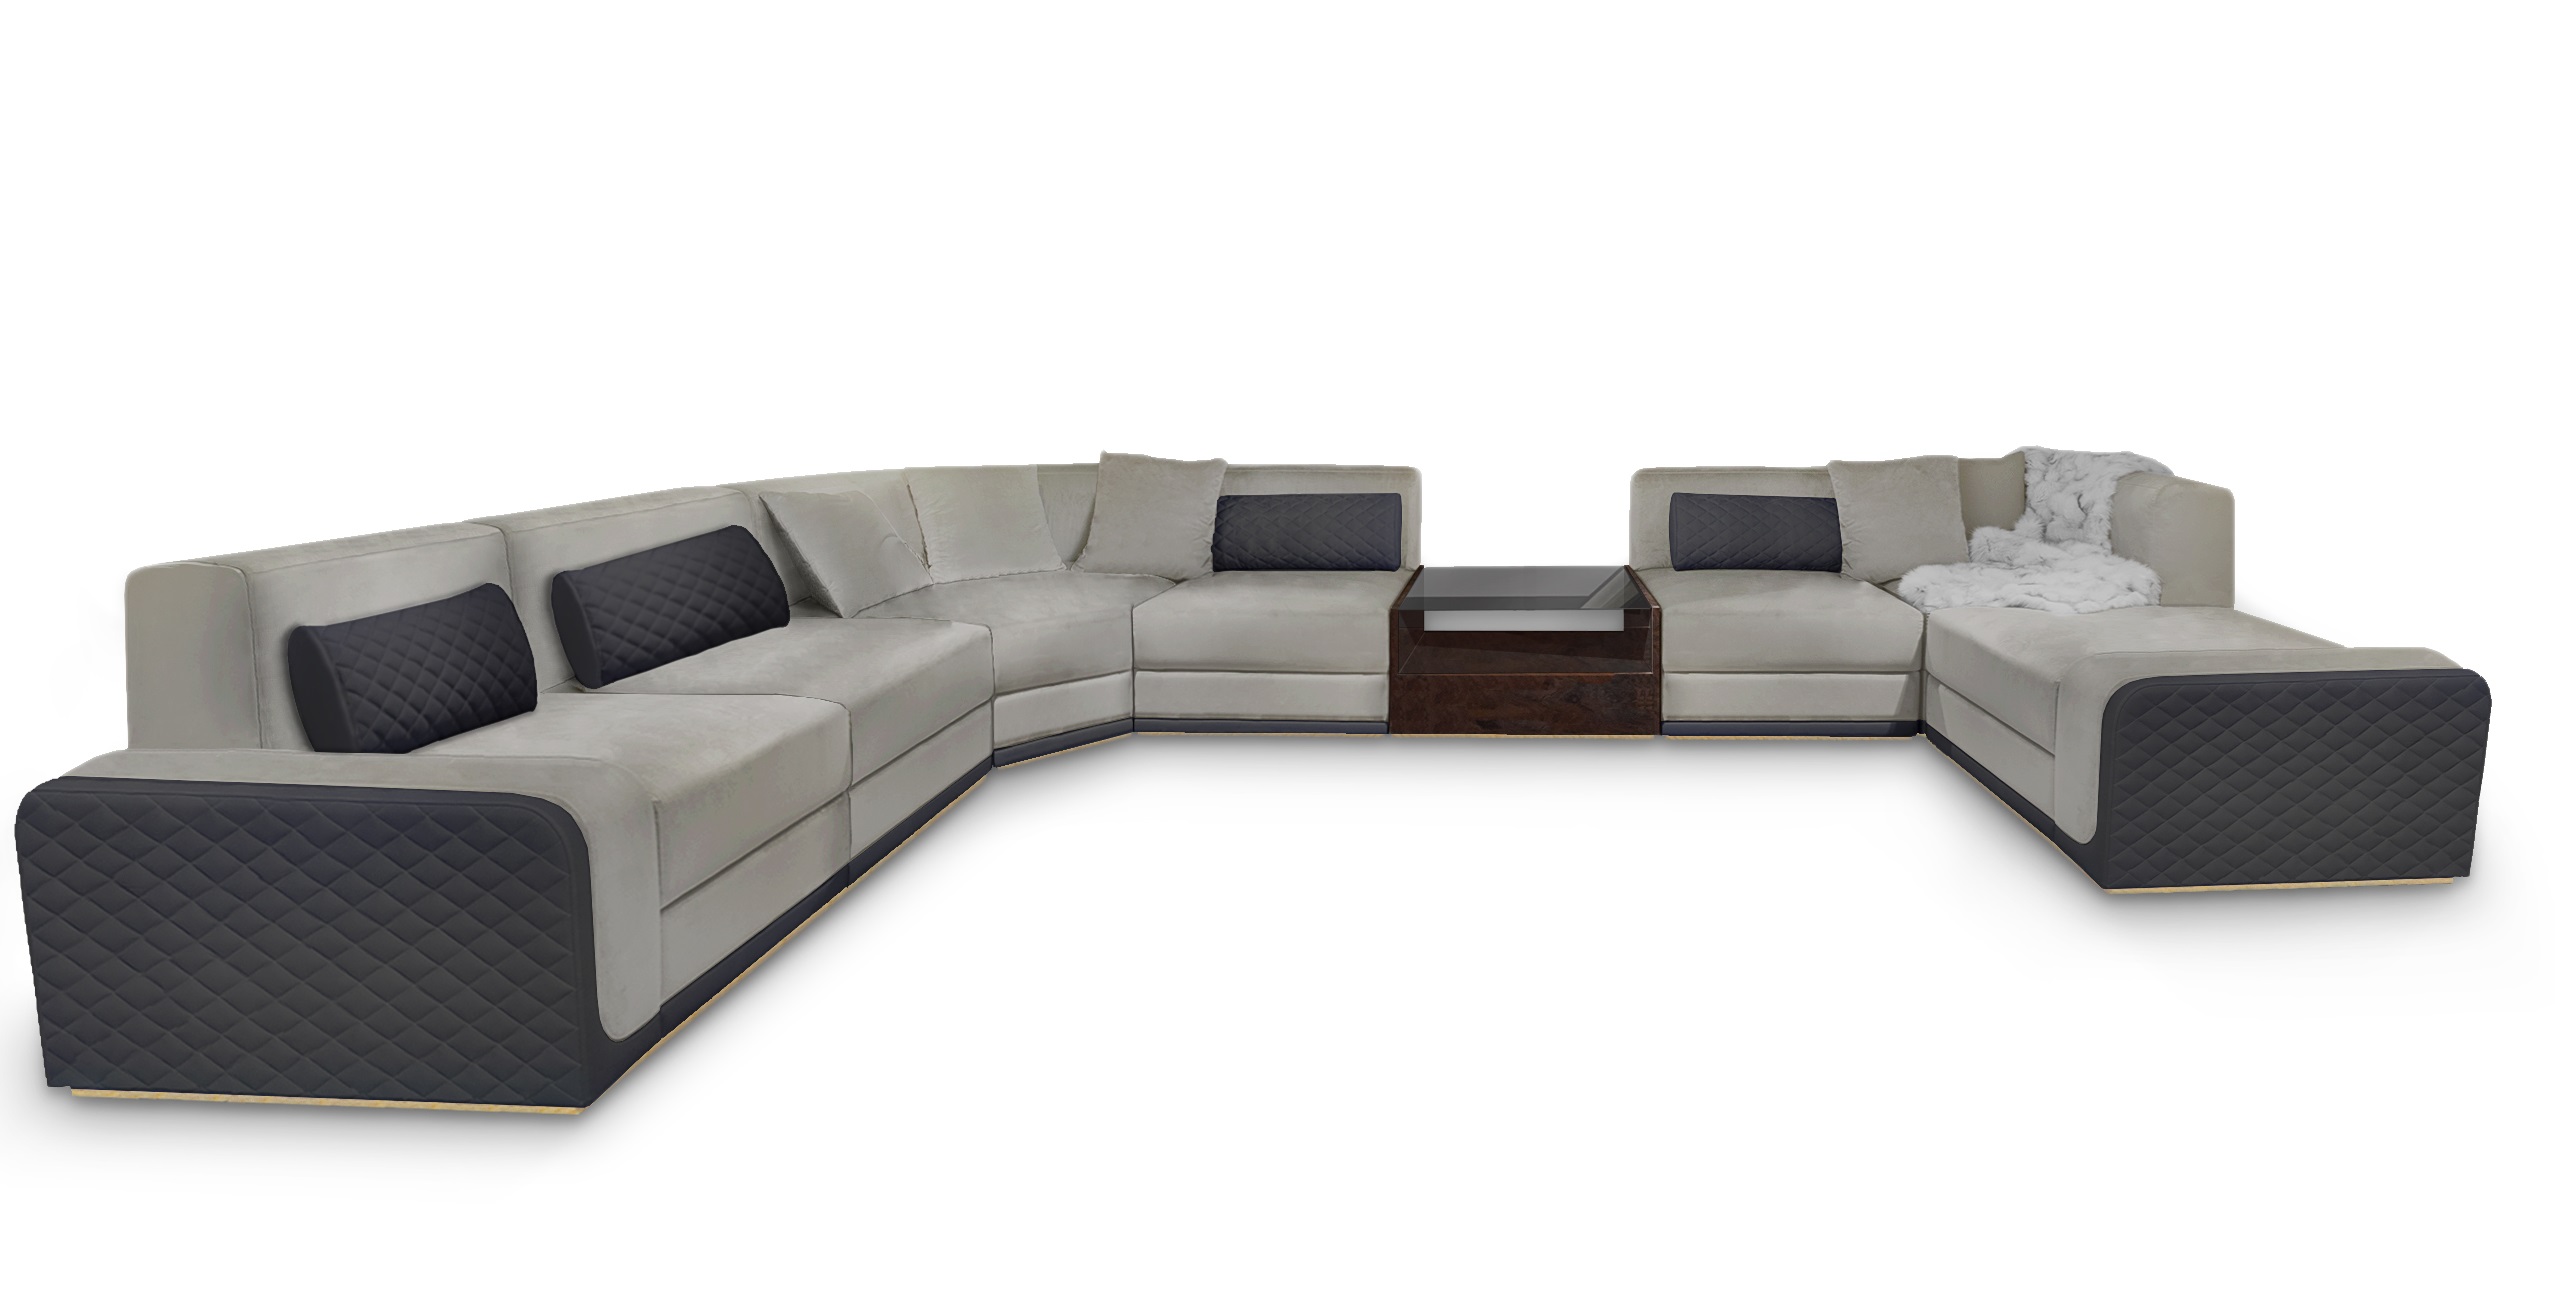 Revealing the Ideal Pieces for Your United Kingdom Living Room the thomson sofa